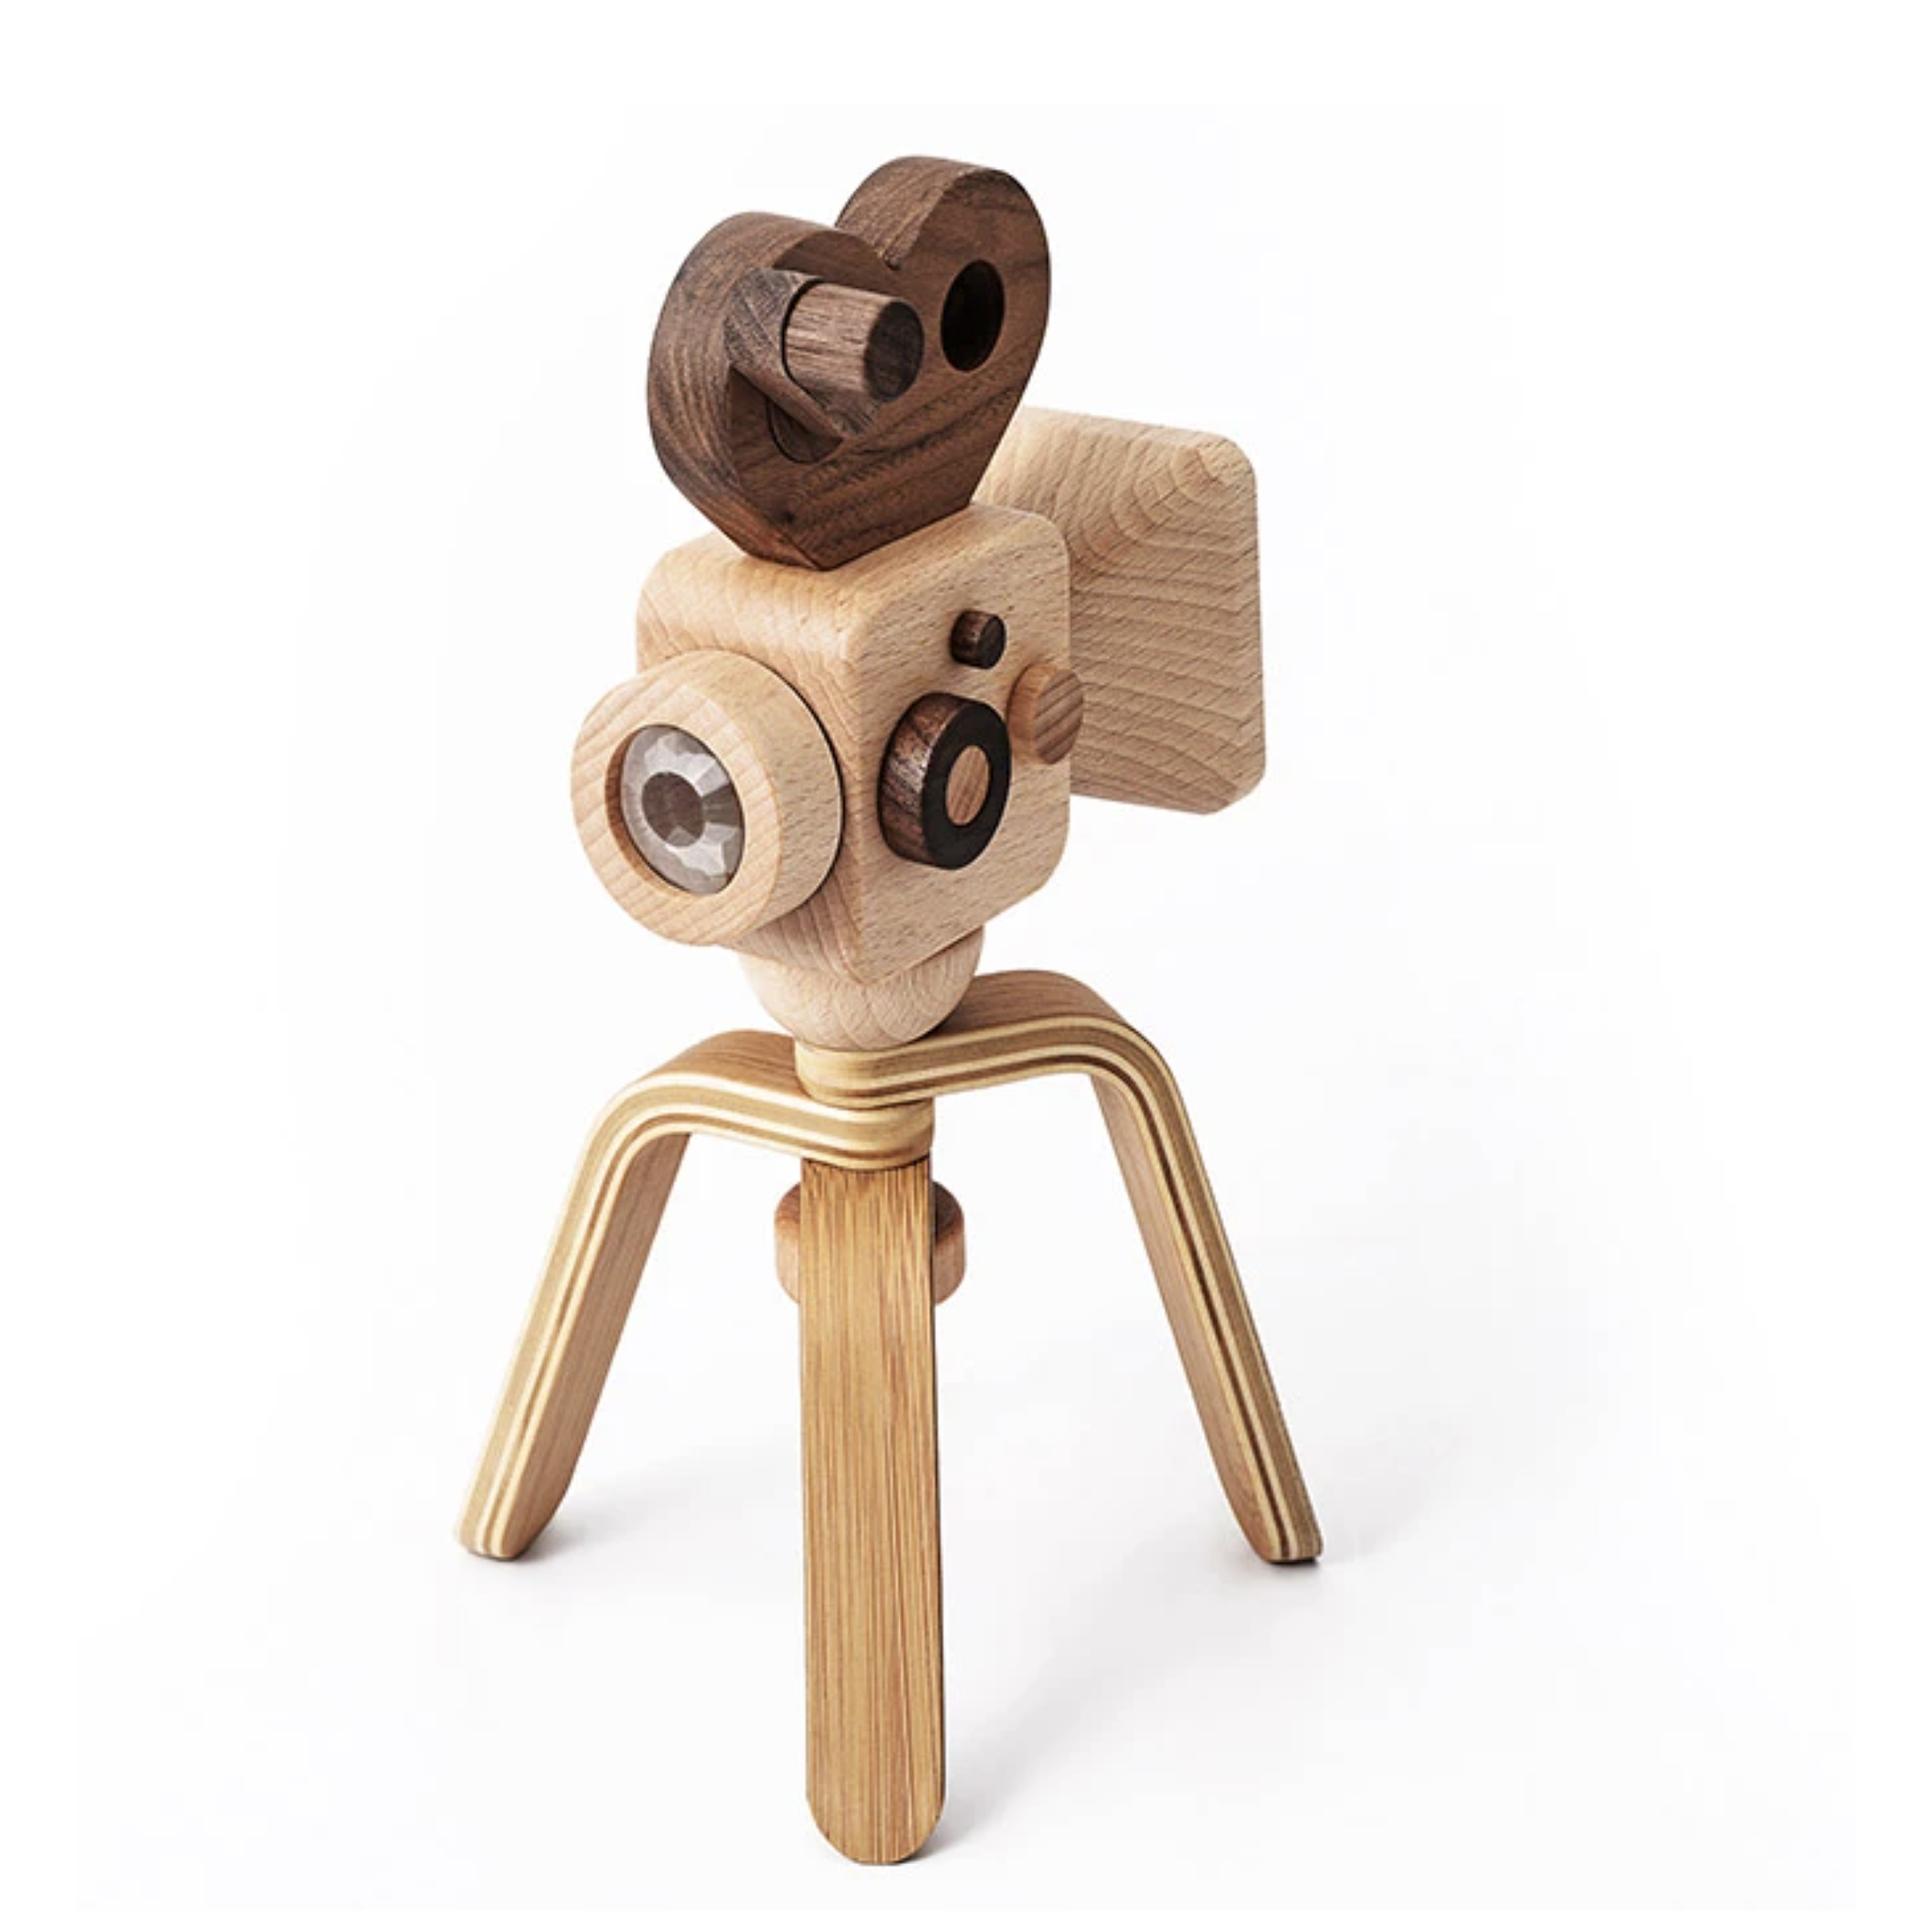 Super 16 Pro Wooden Toy Camera with Tripod